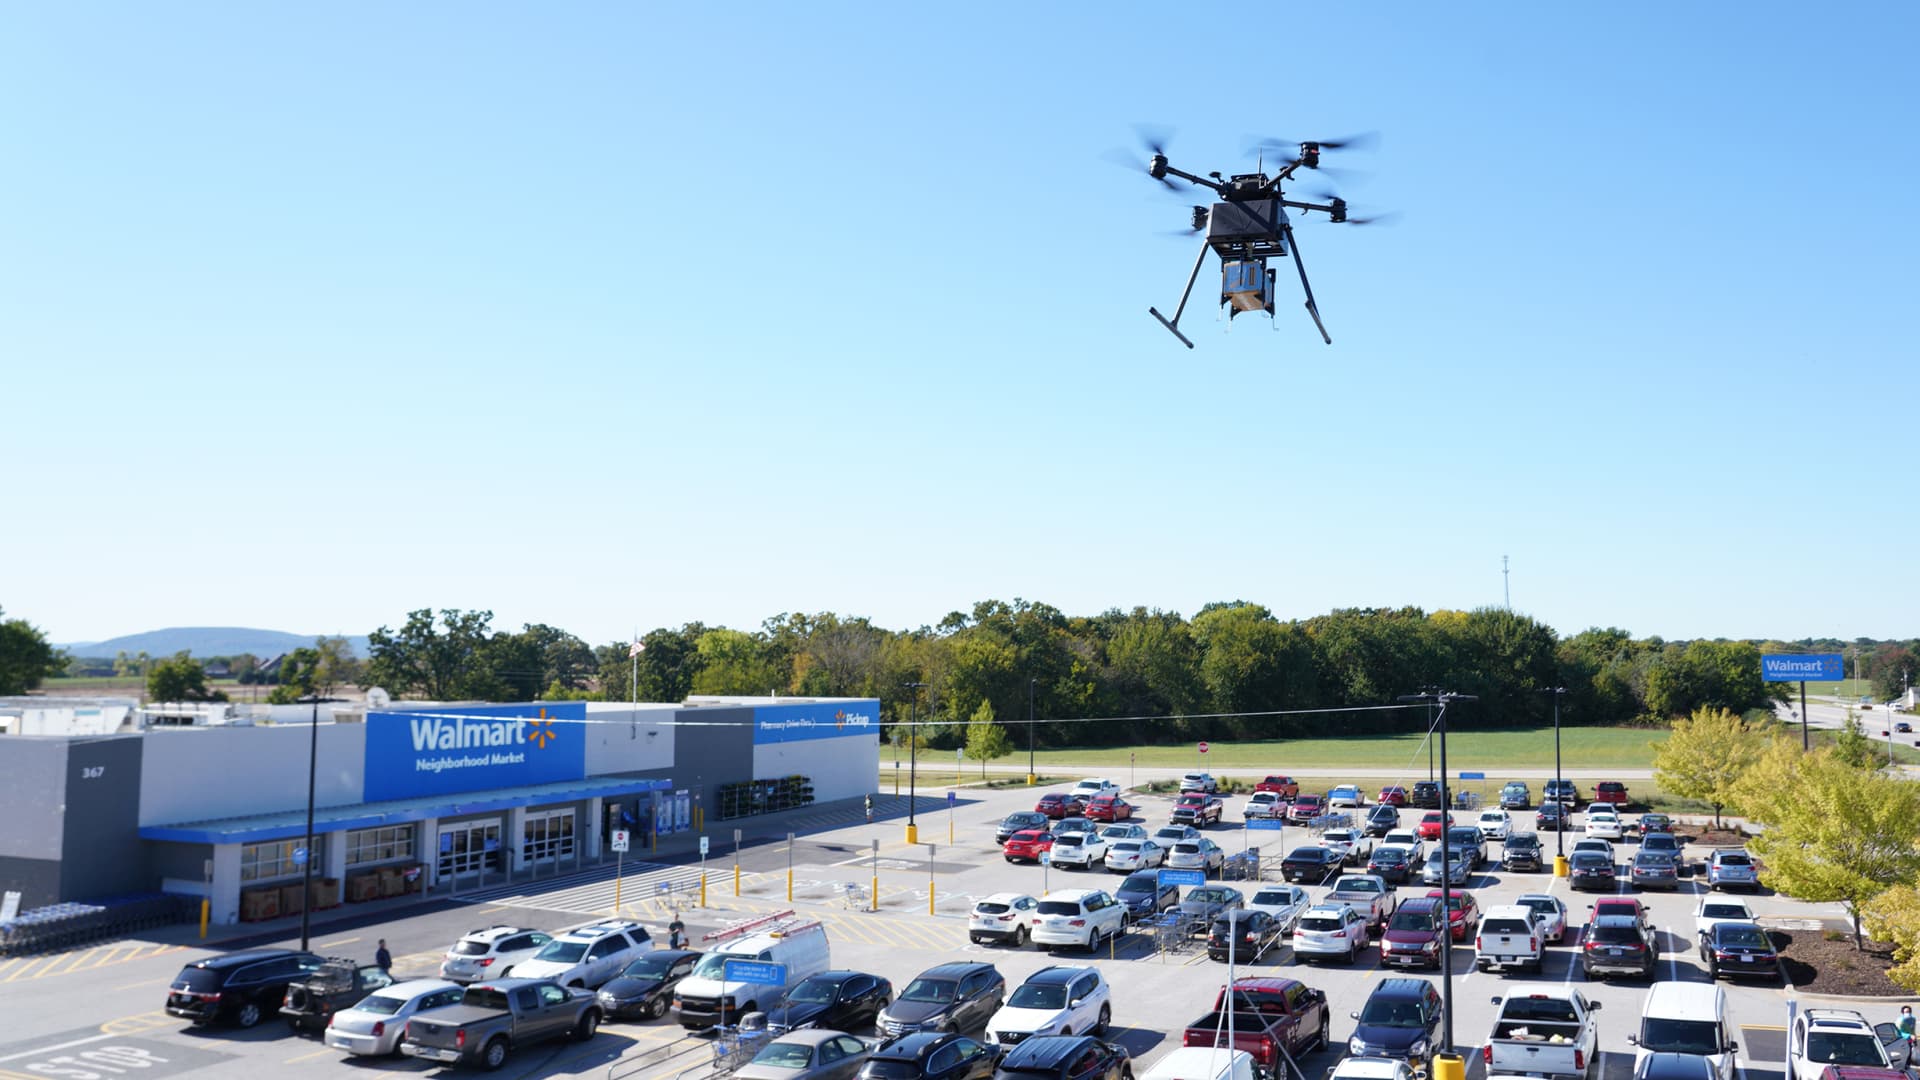 Walmart expands its drone-delivery service to reach 4 million households